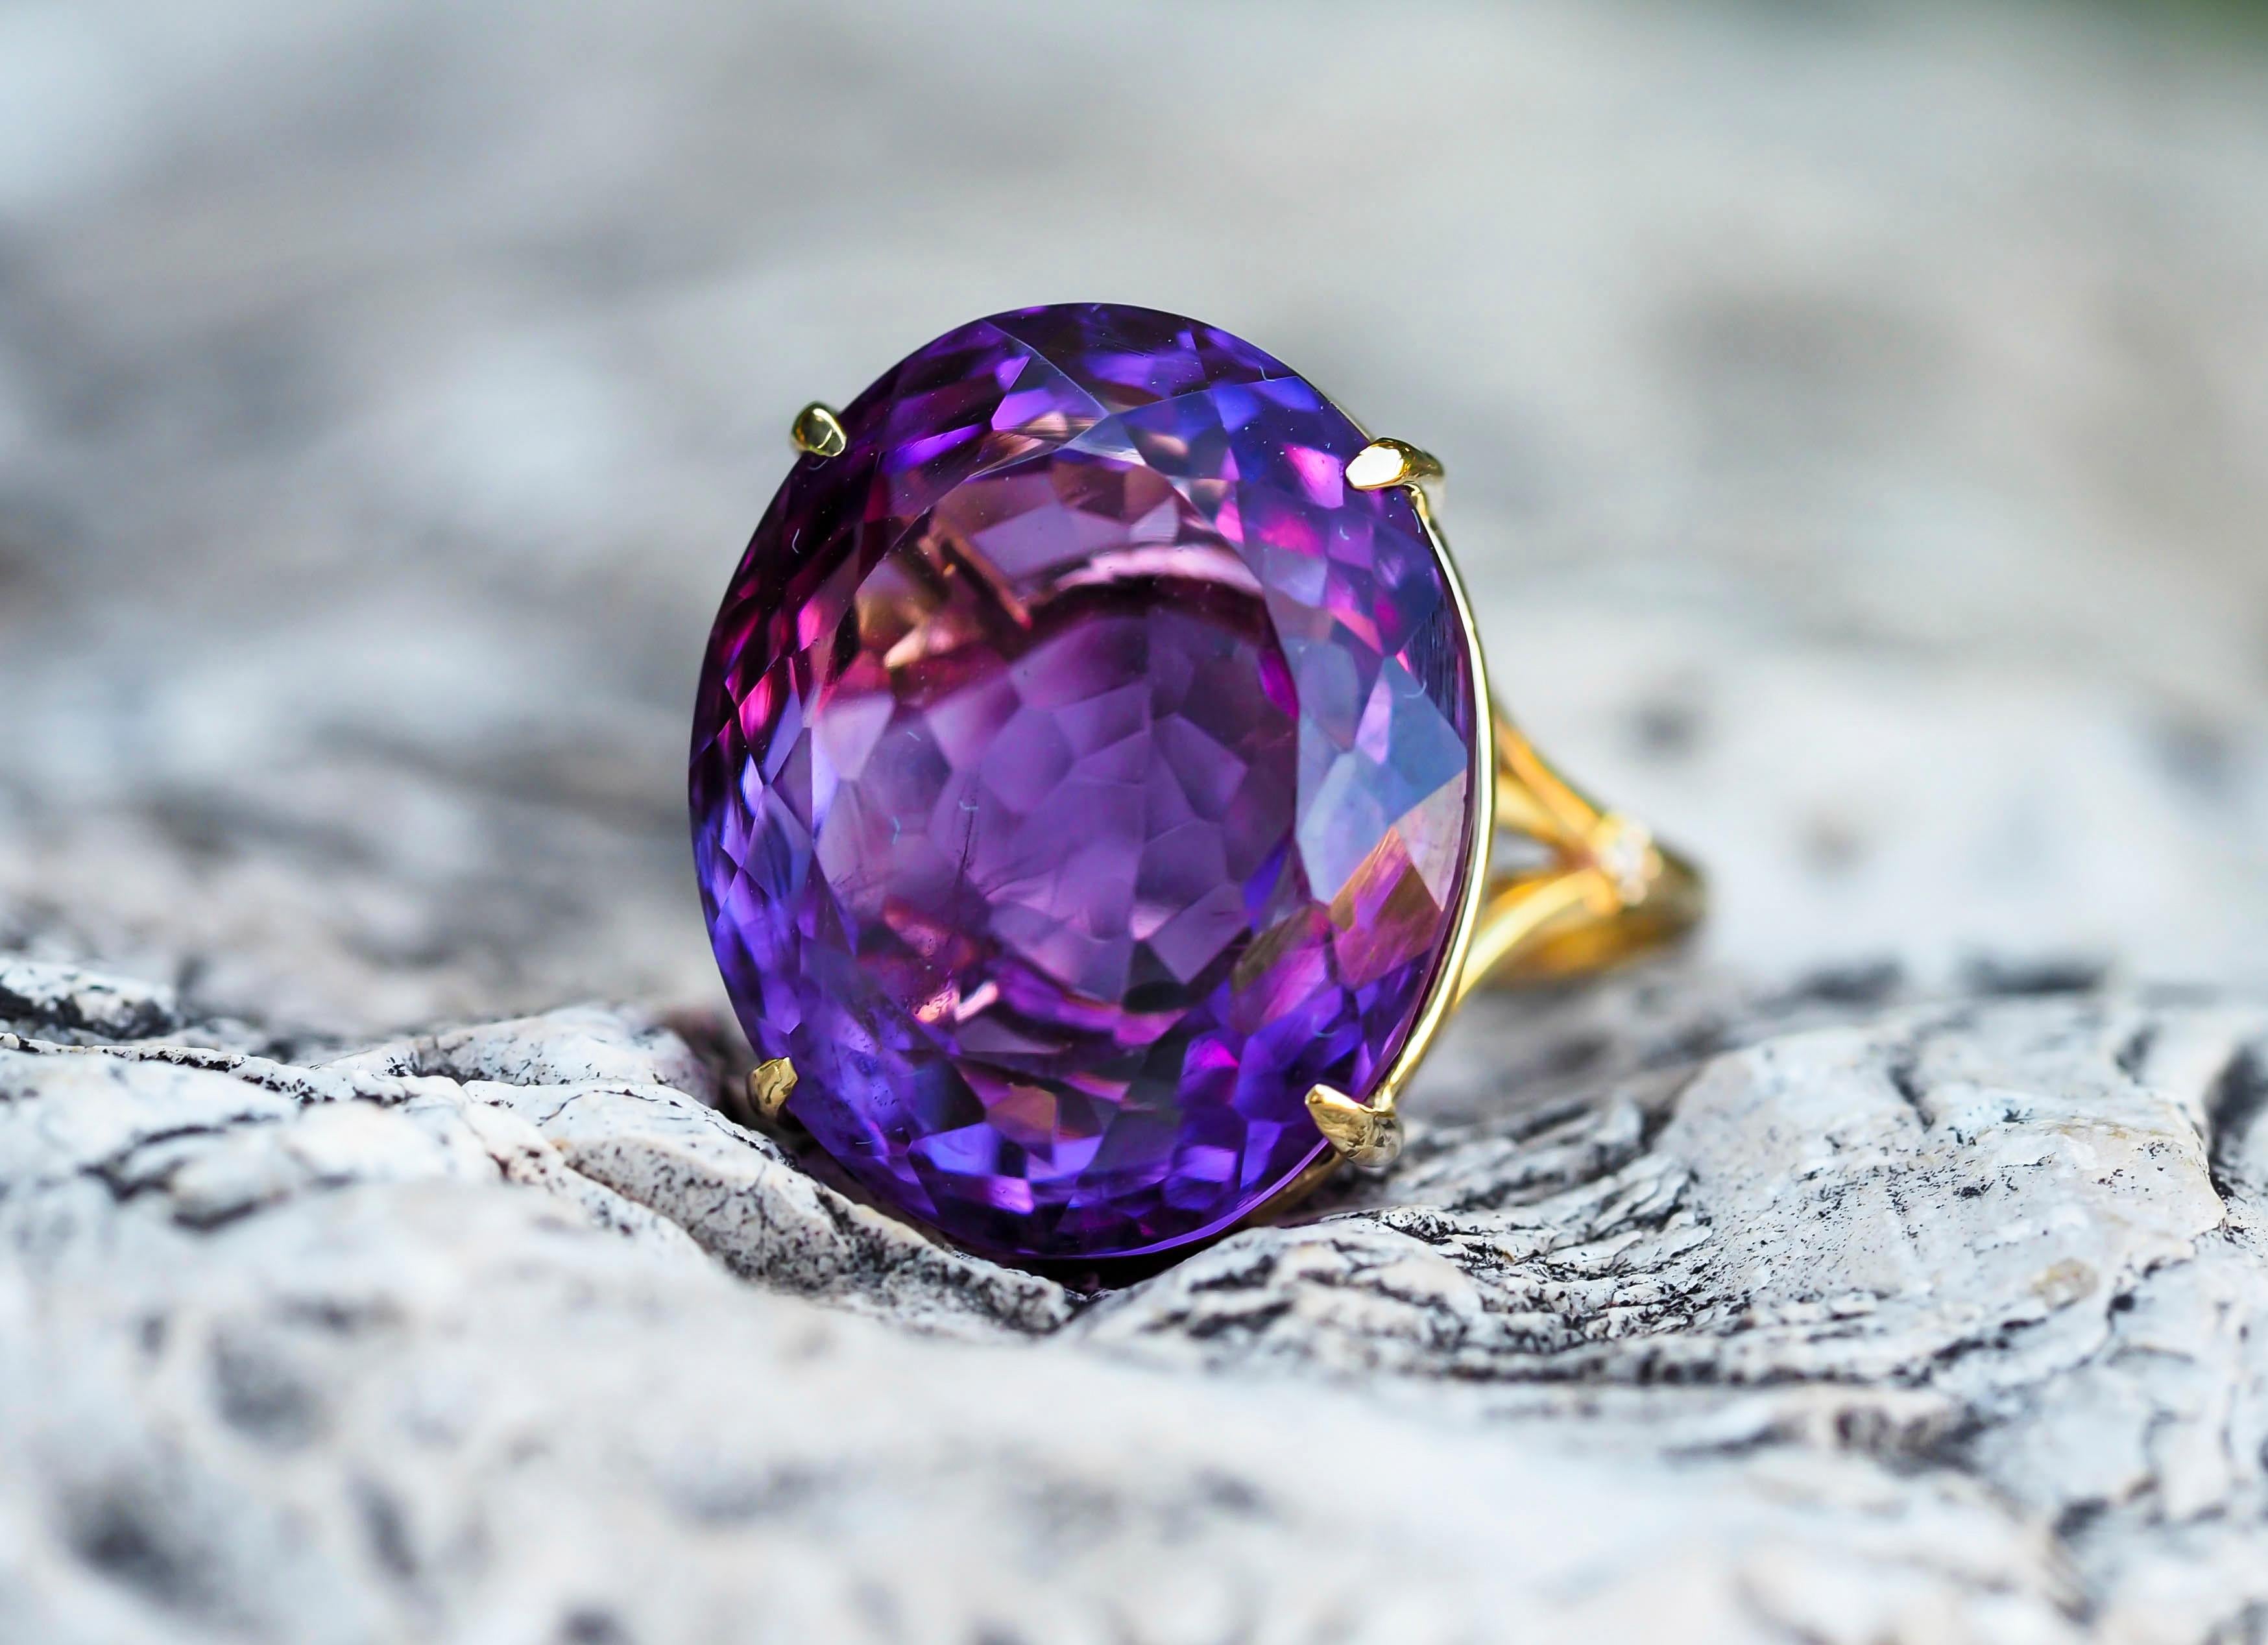 14 karat solid gold ring with genuine amethyst and diamonds. February birthstone.
Weight: 4 g. 
Size: 7 US
Central stone: genuine amethyst
Weight: approx 8 ct.
Color: violet, oval cut. 
Clarity: Transparent with inclusions.
Surrounding